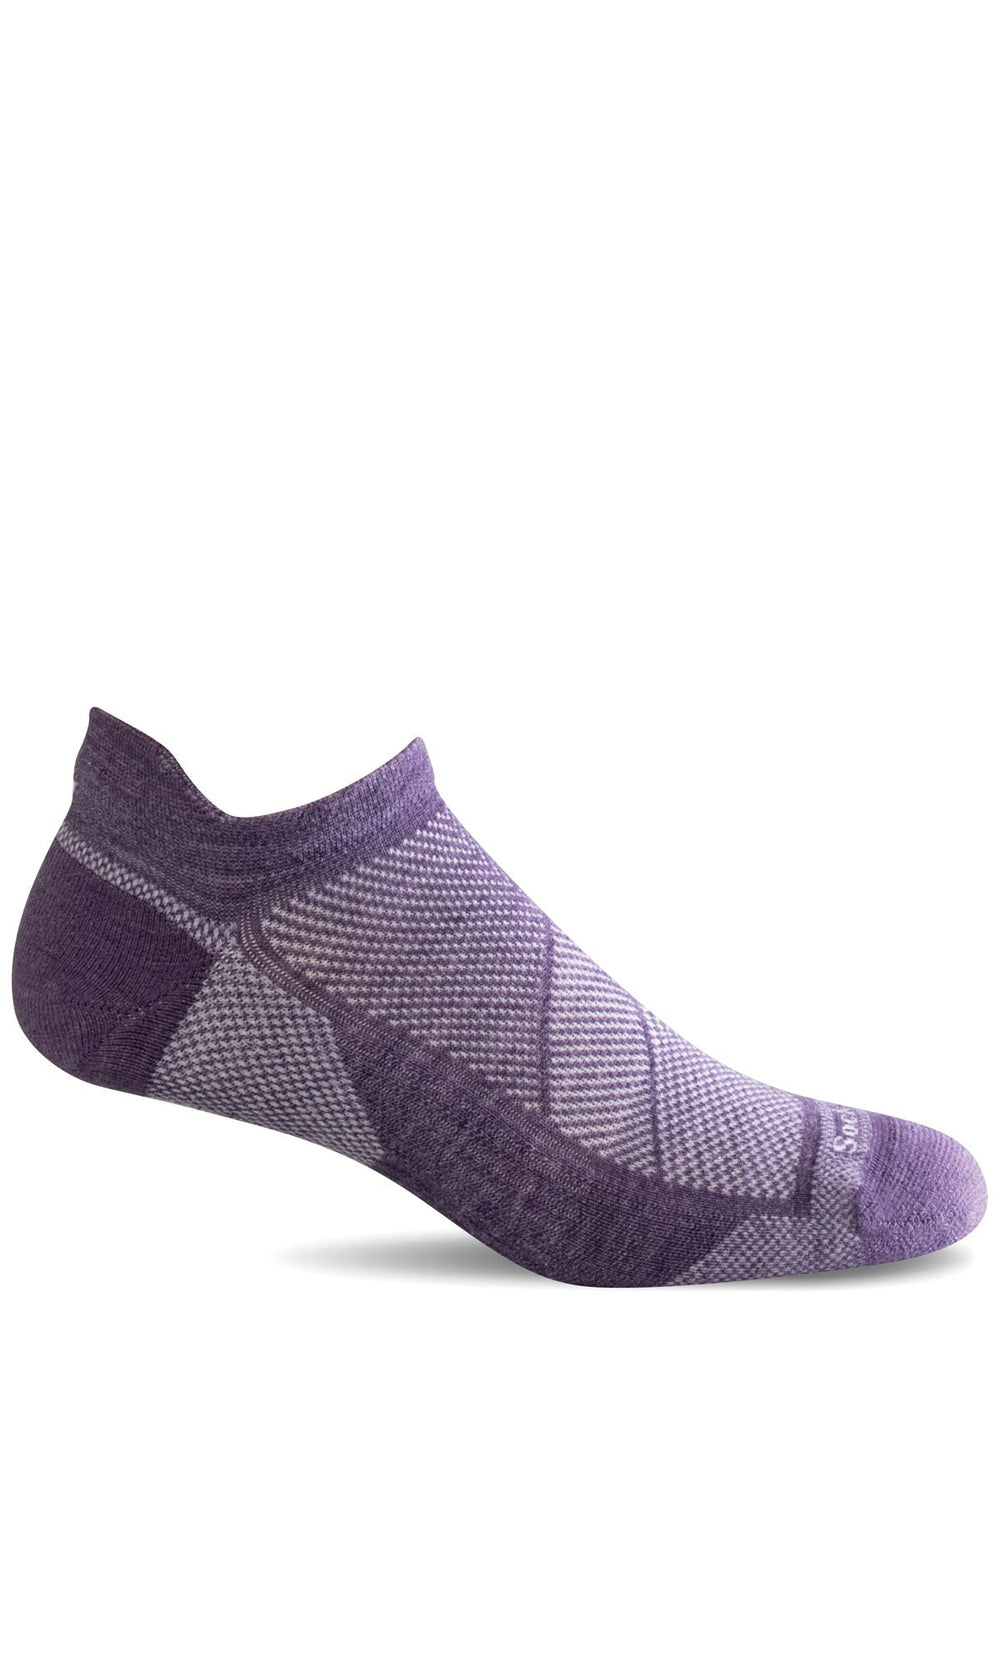 Sockwell Elevate Micro Firm Compression Socks (Women's)